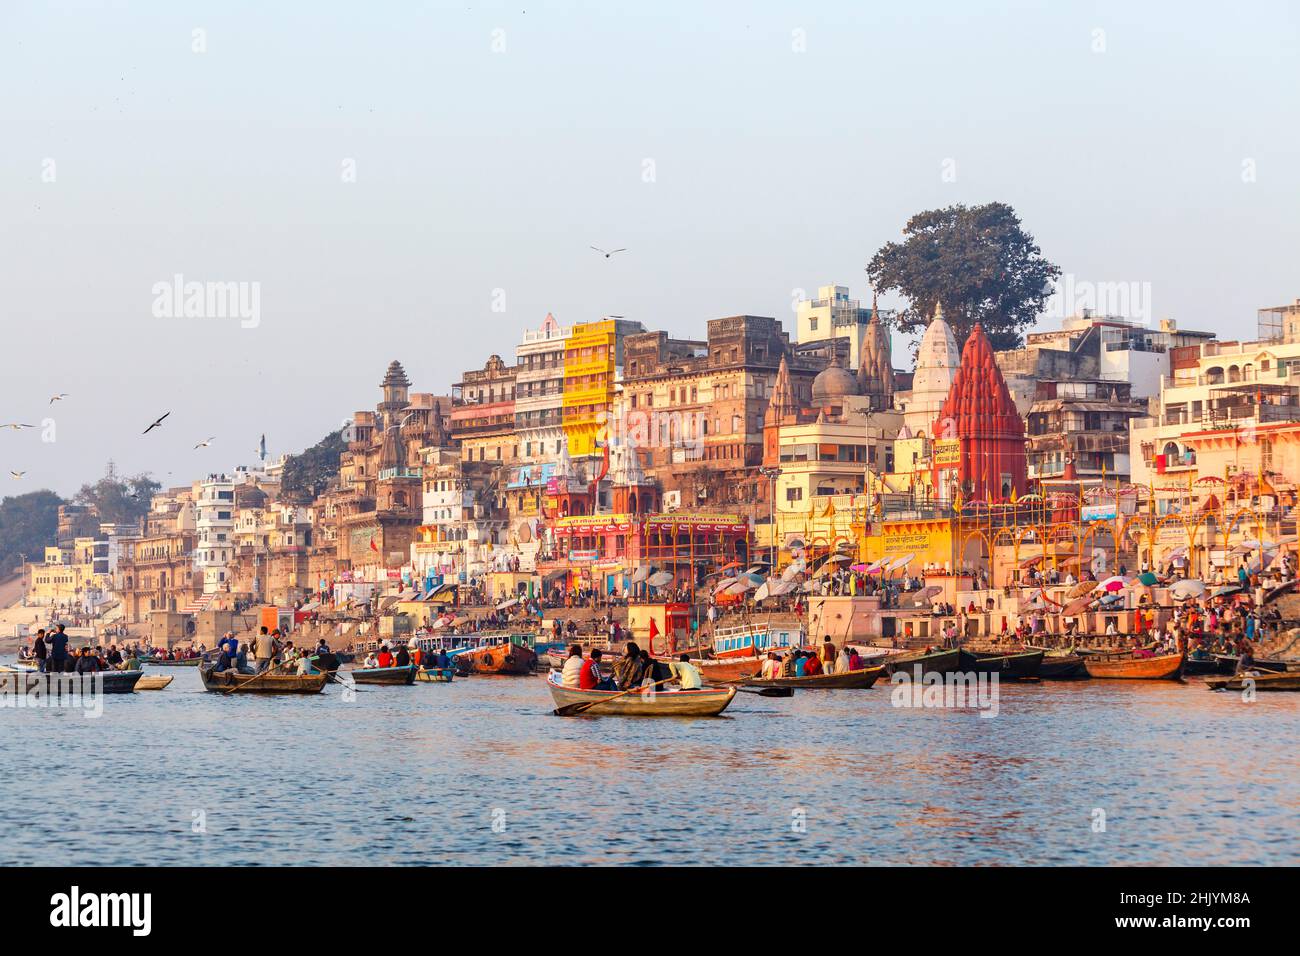 Tourist rowing boats and iconic riverside ghats viewing Prayag Ghat in Varanasi, a city on the River Ganges in Uttar Pradesh, north India Stock Photo